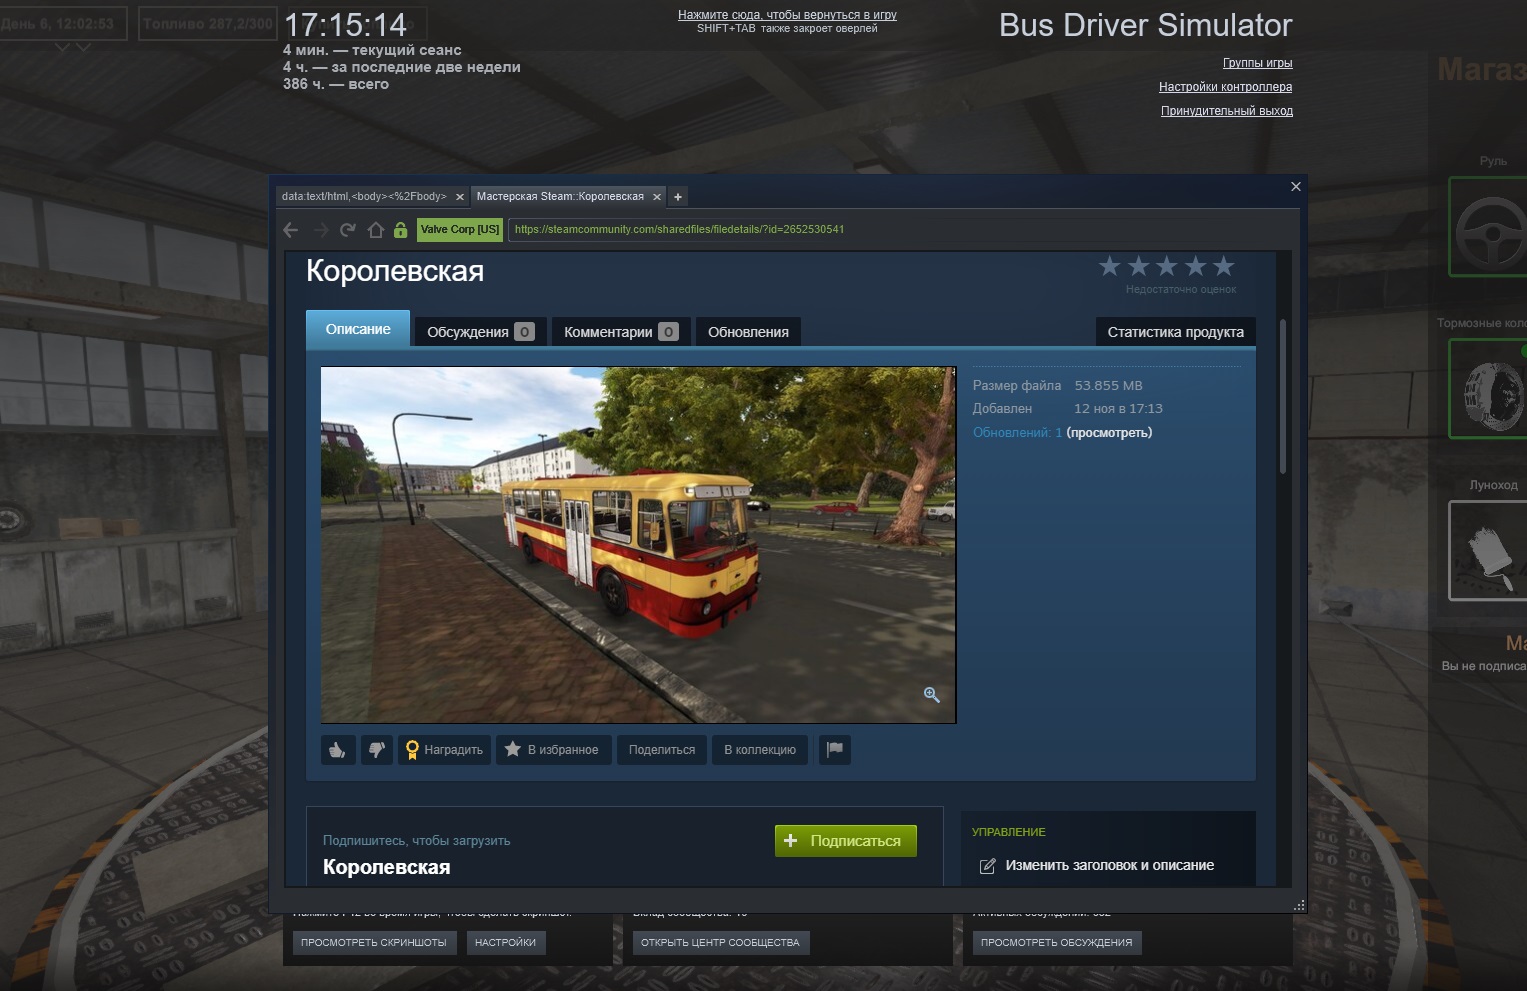 Bus Driver Simulator - How to Upload Livery on Steam Workshop and Implement - Uploading your livery to Steam Workshop - 36F6ED9